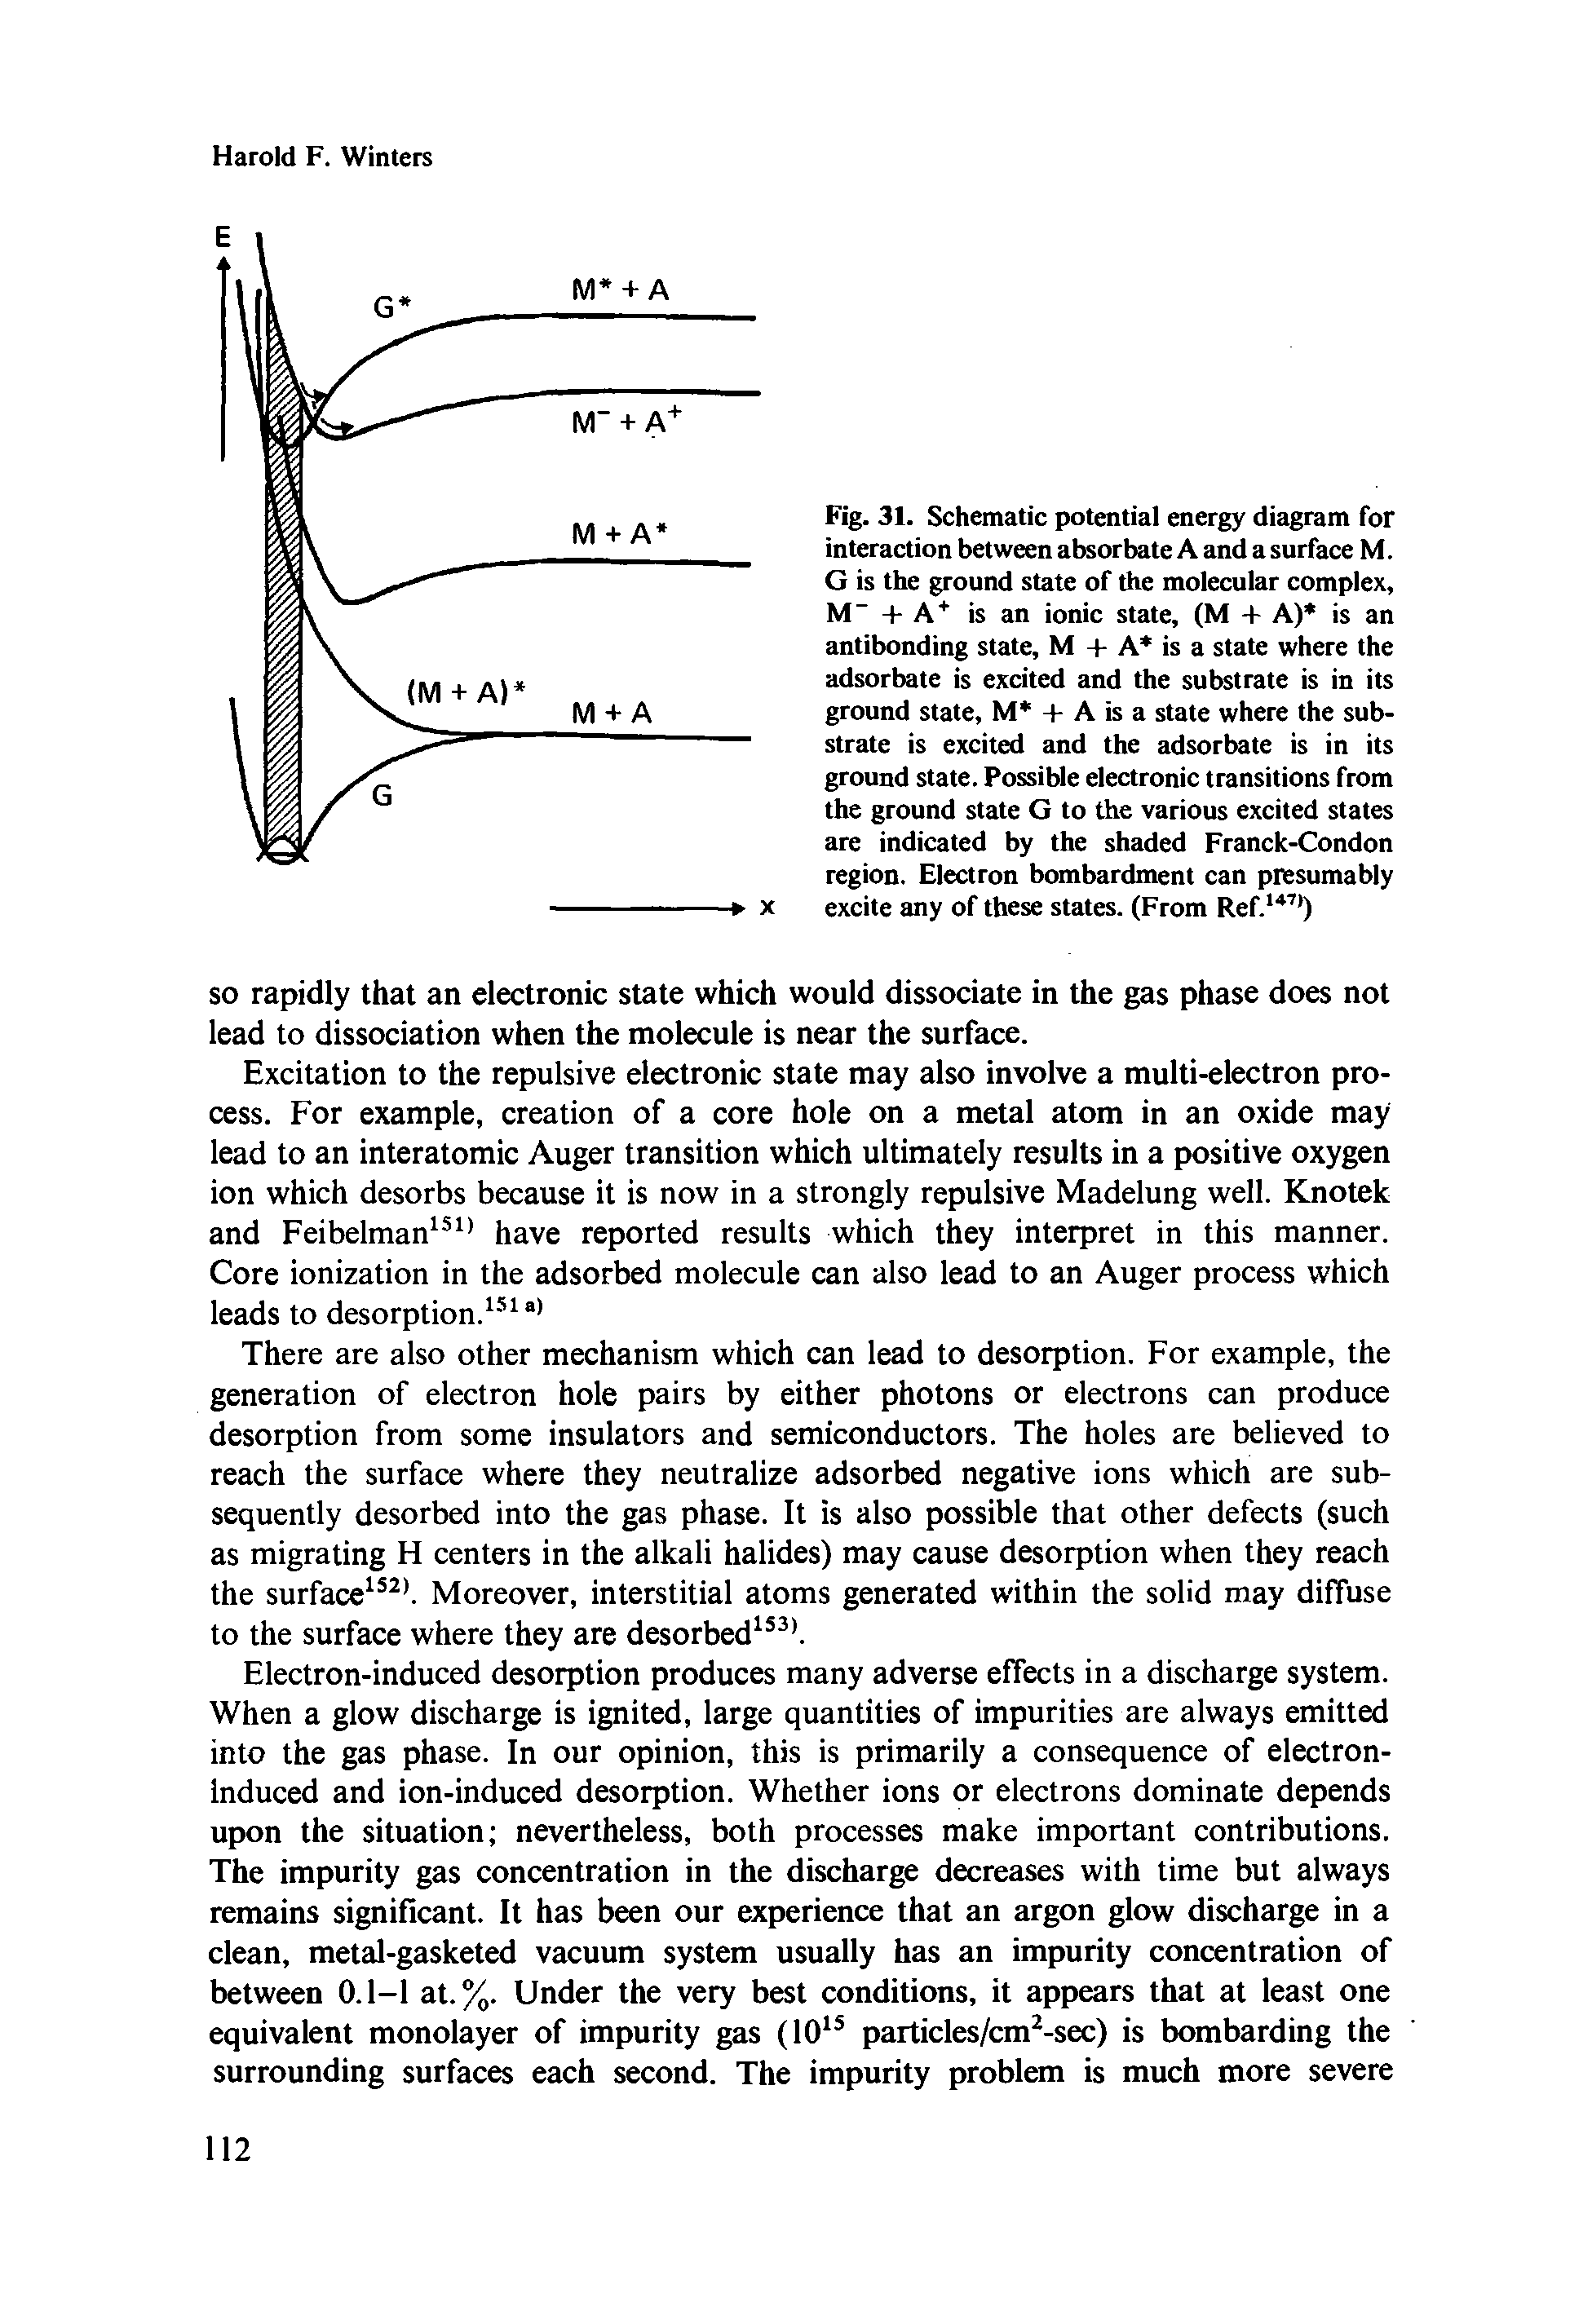 Fig. 31. Schematic potential energy diagram for interaction between absorbate A and a surface M. G is the ground state of the molecular complex, M" + A is an ionic state, (M + A) is an antibonding state, M + A is a state where the adsorbate is excited and the substrate is in its ground state, M + A is a state where the substrate is excited and the adsorbate is in its ground state. Possible electronic transitions from the ground state G to the various excited states are indicated by the shaded Franck-Condon region. Electron bombardment can presumably excite any of these states. (From Ref. )...